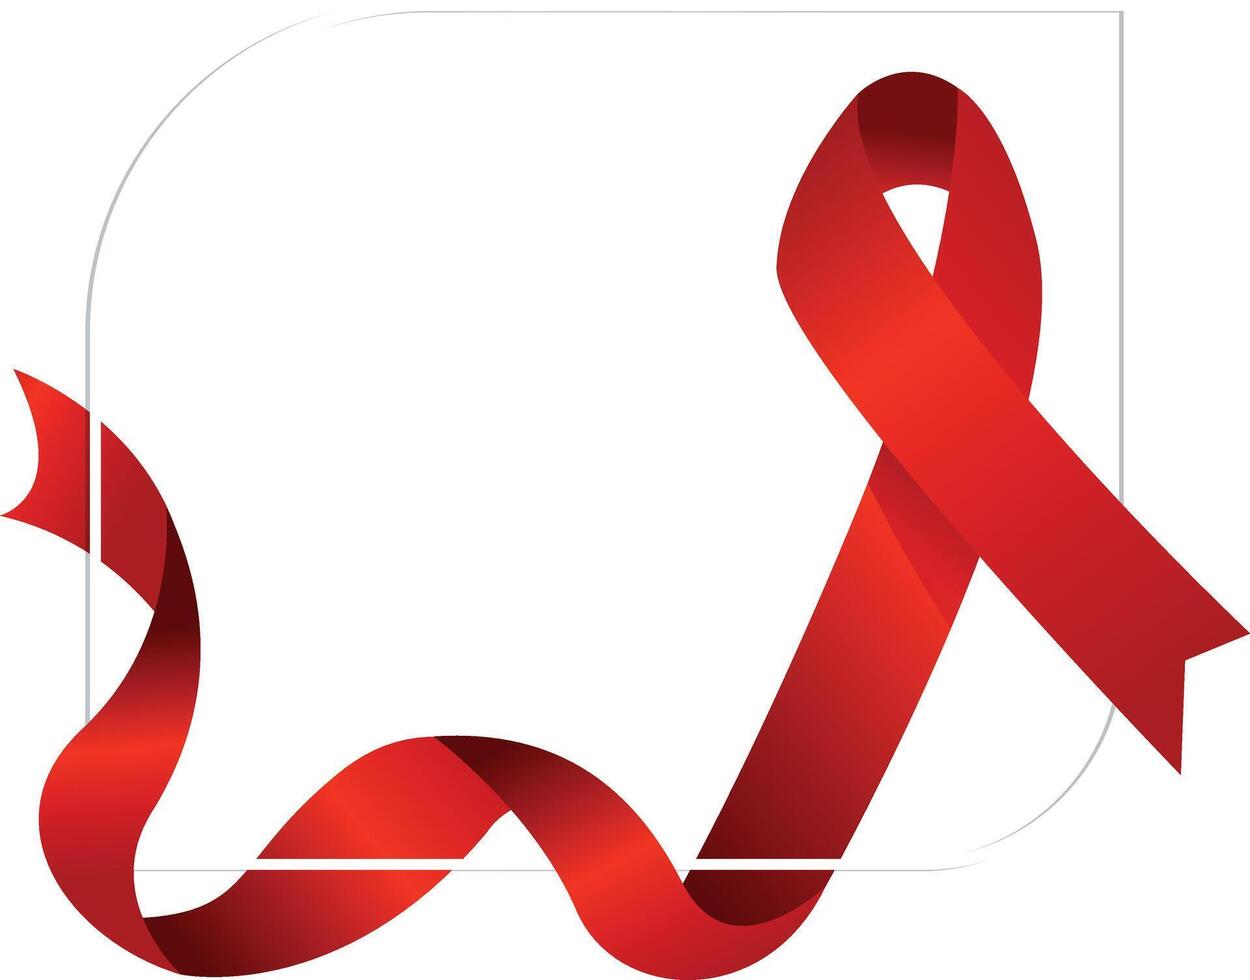 Aids red ribbon. World aids day symbol of red ribbon, vector